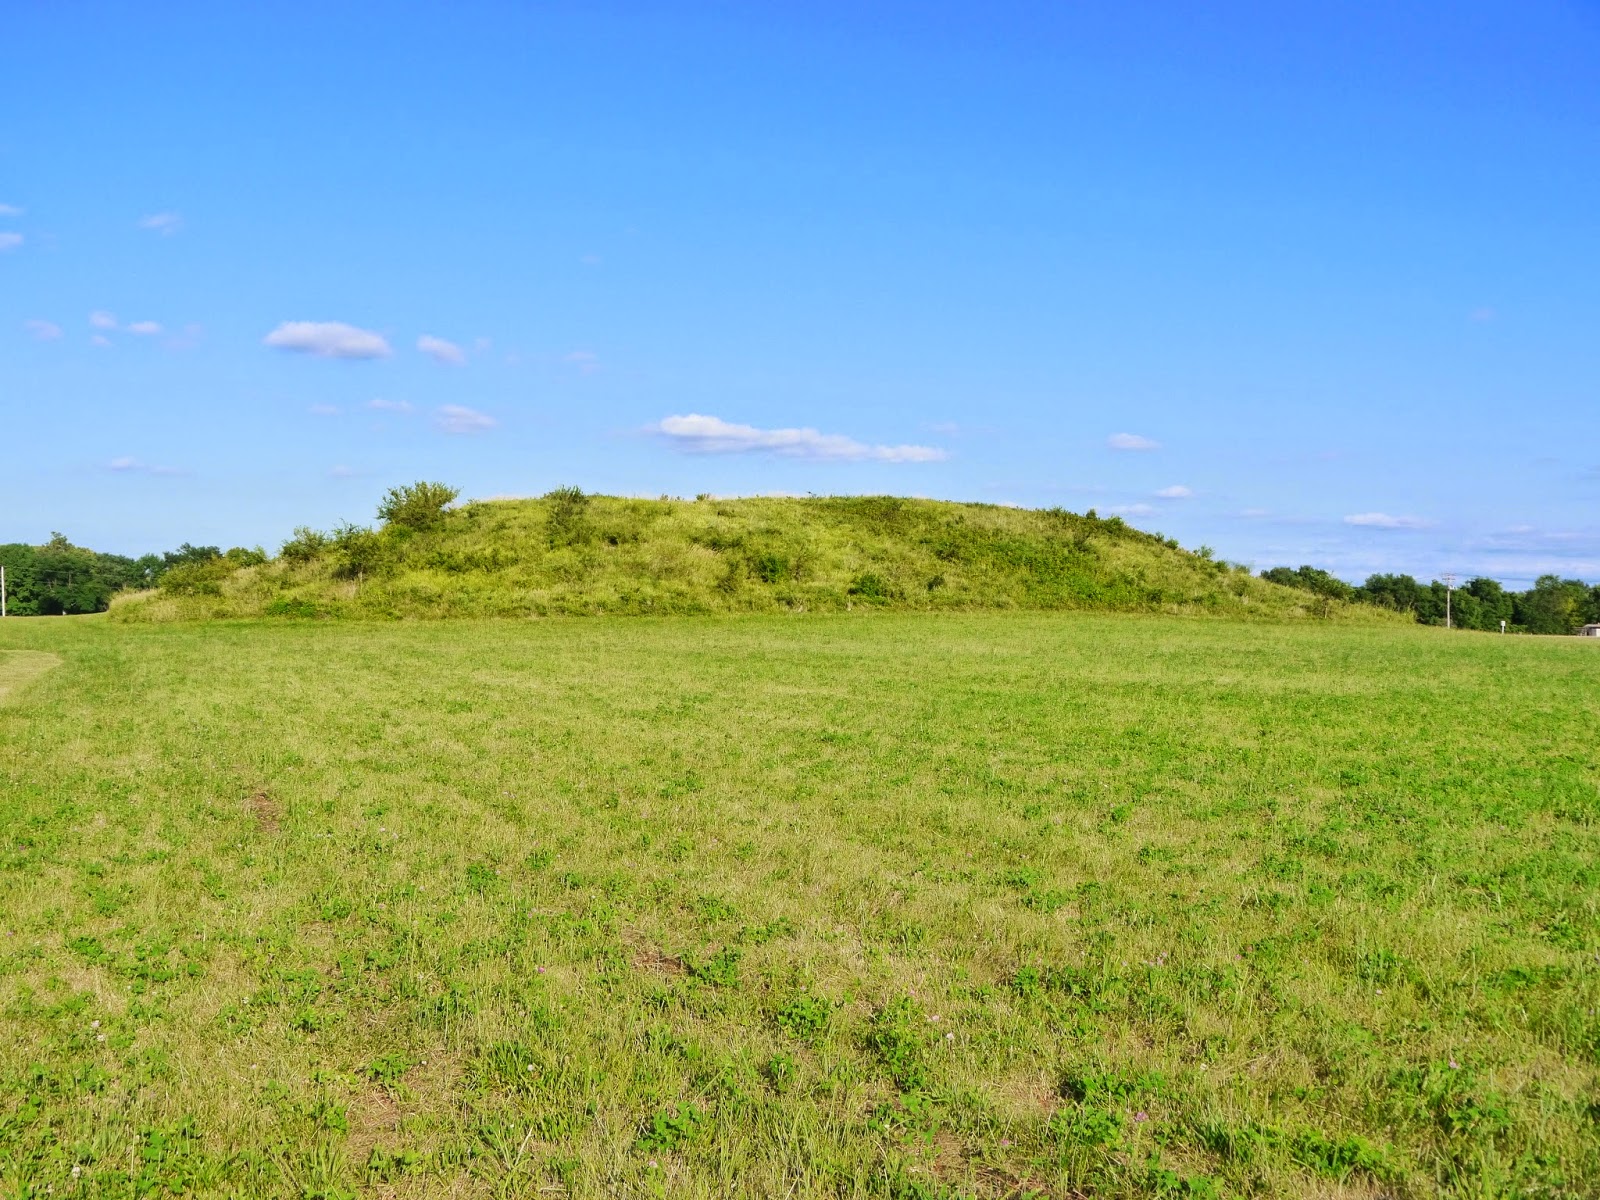 American Travel Journal: Nature/Culture Trail - Cahokia Mounds State ...